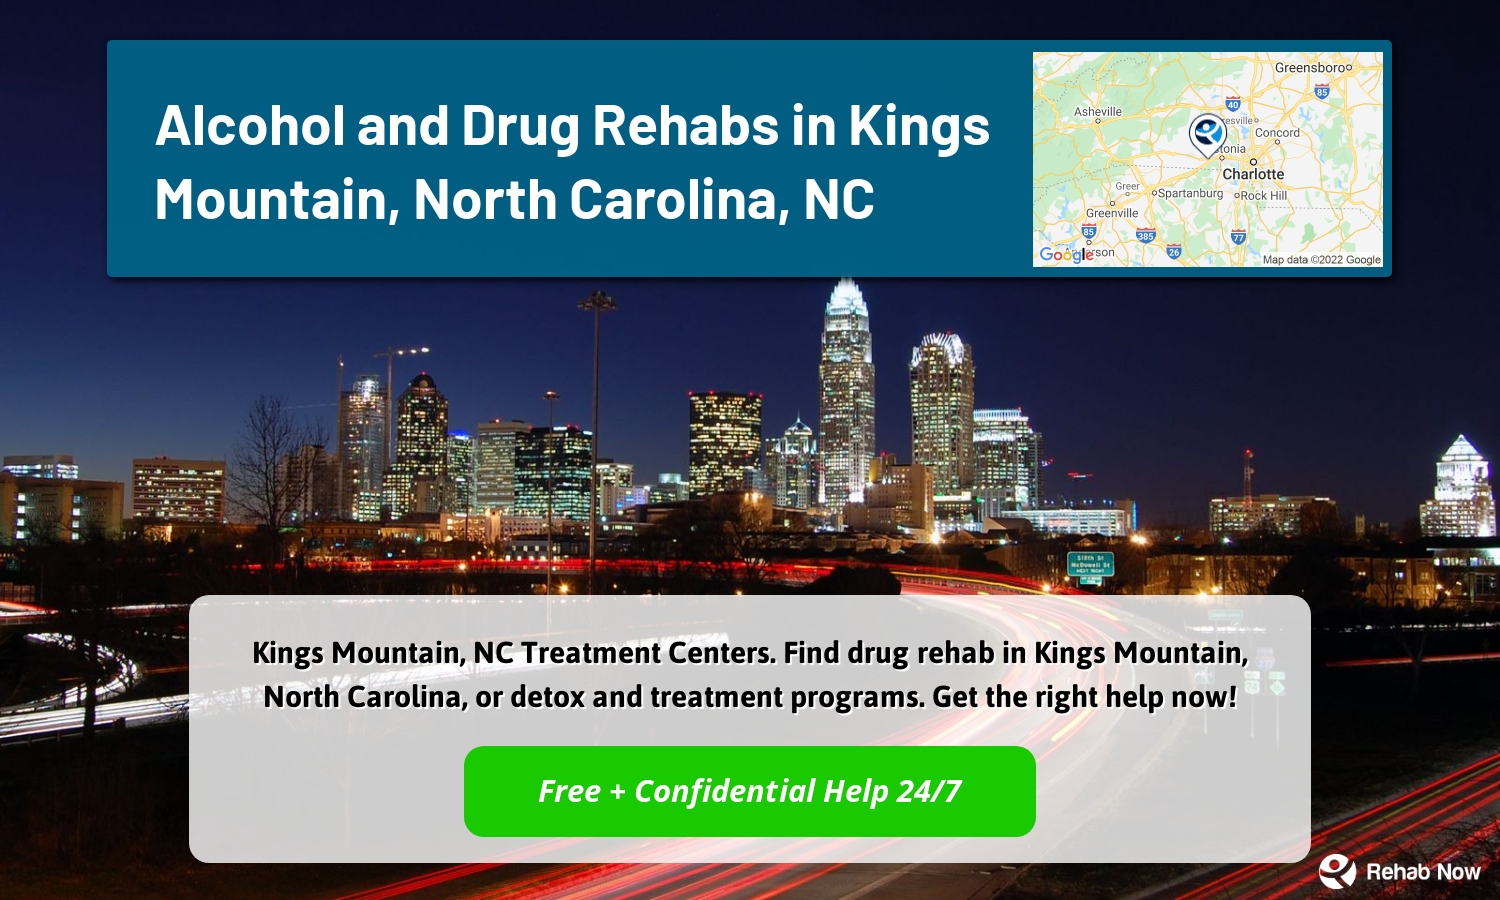 Kings Mountain, NC Treatment Centers. Find drug rehab in Kings Mountain, North Carolina, or detox and treatment programs. Get the right help now!